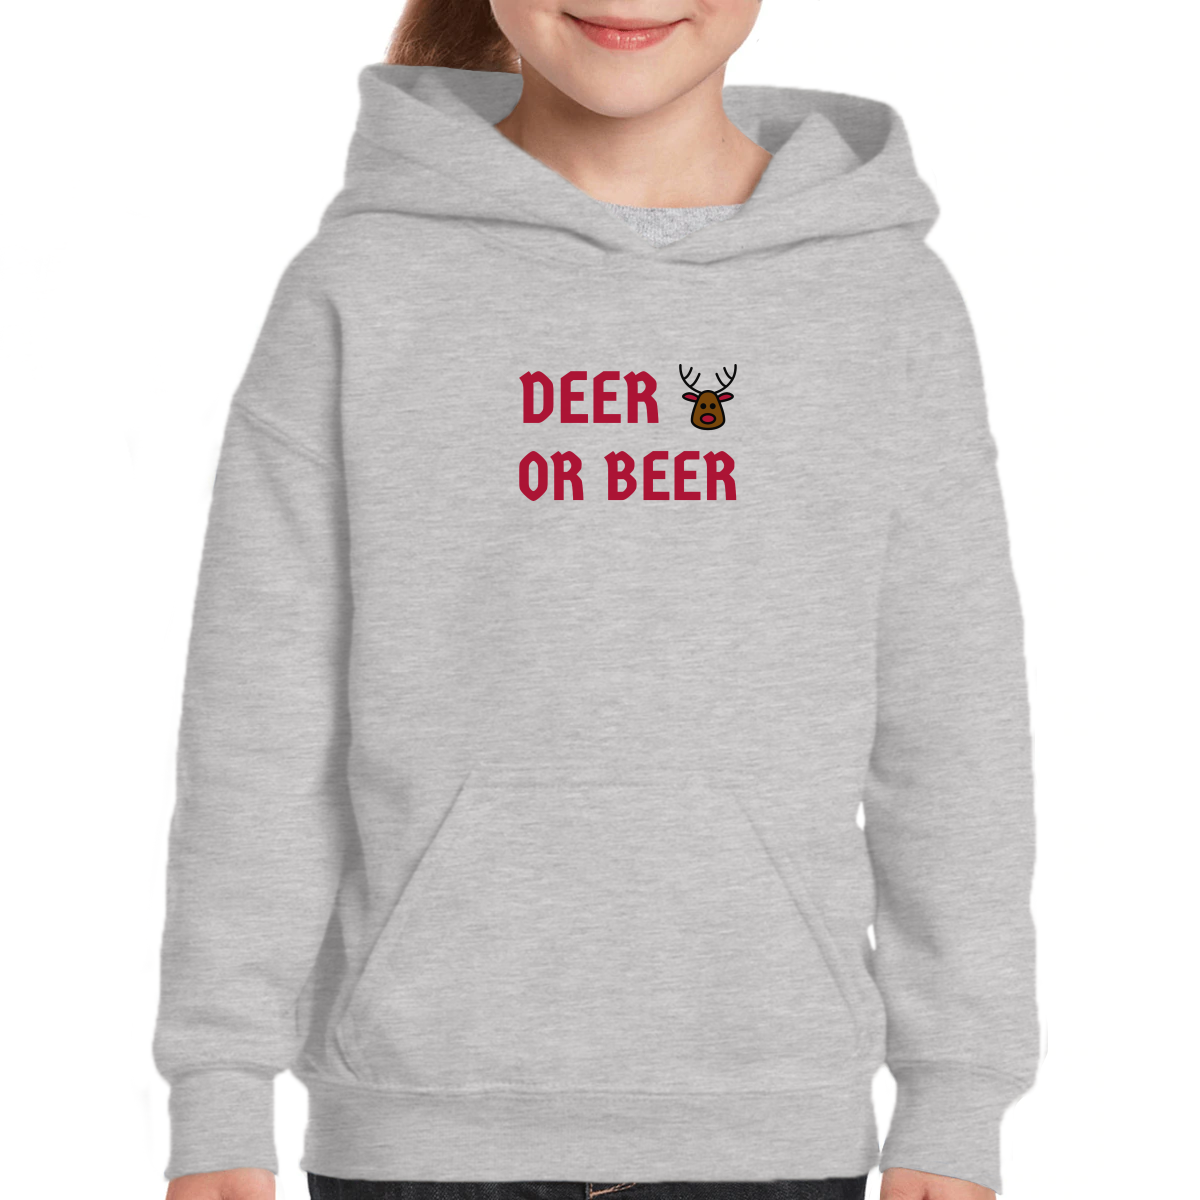 I Don't Have a Red Nose Kids Hoodie | Gray